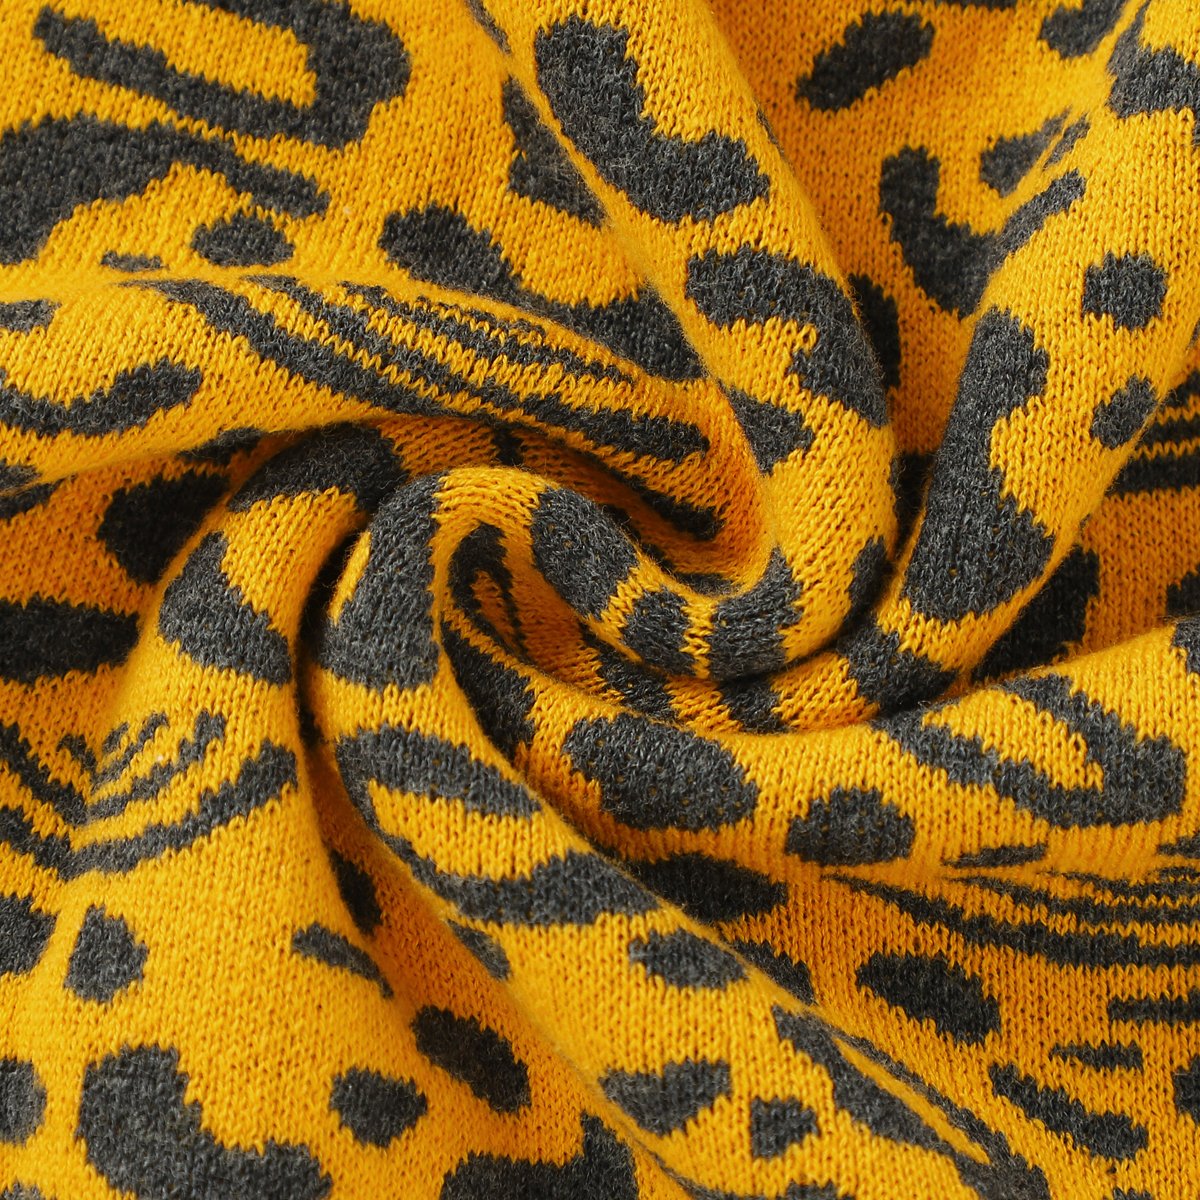 Leopard Print Cotton Baby Four Seasons Blanket And Quilt Baby Wholesale Clothing